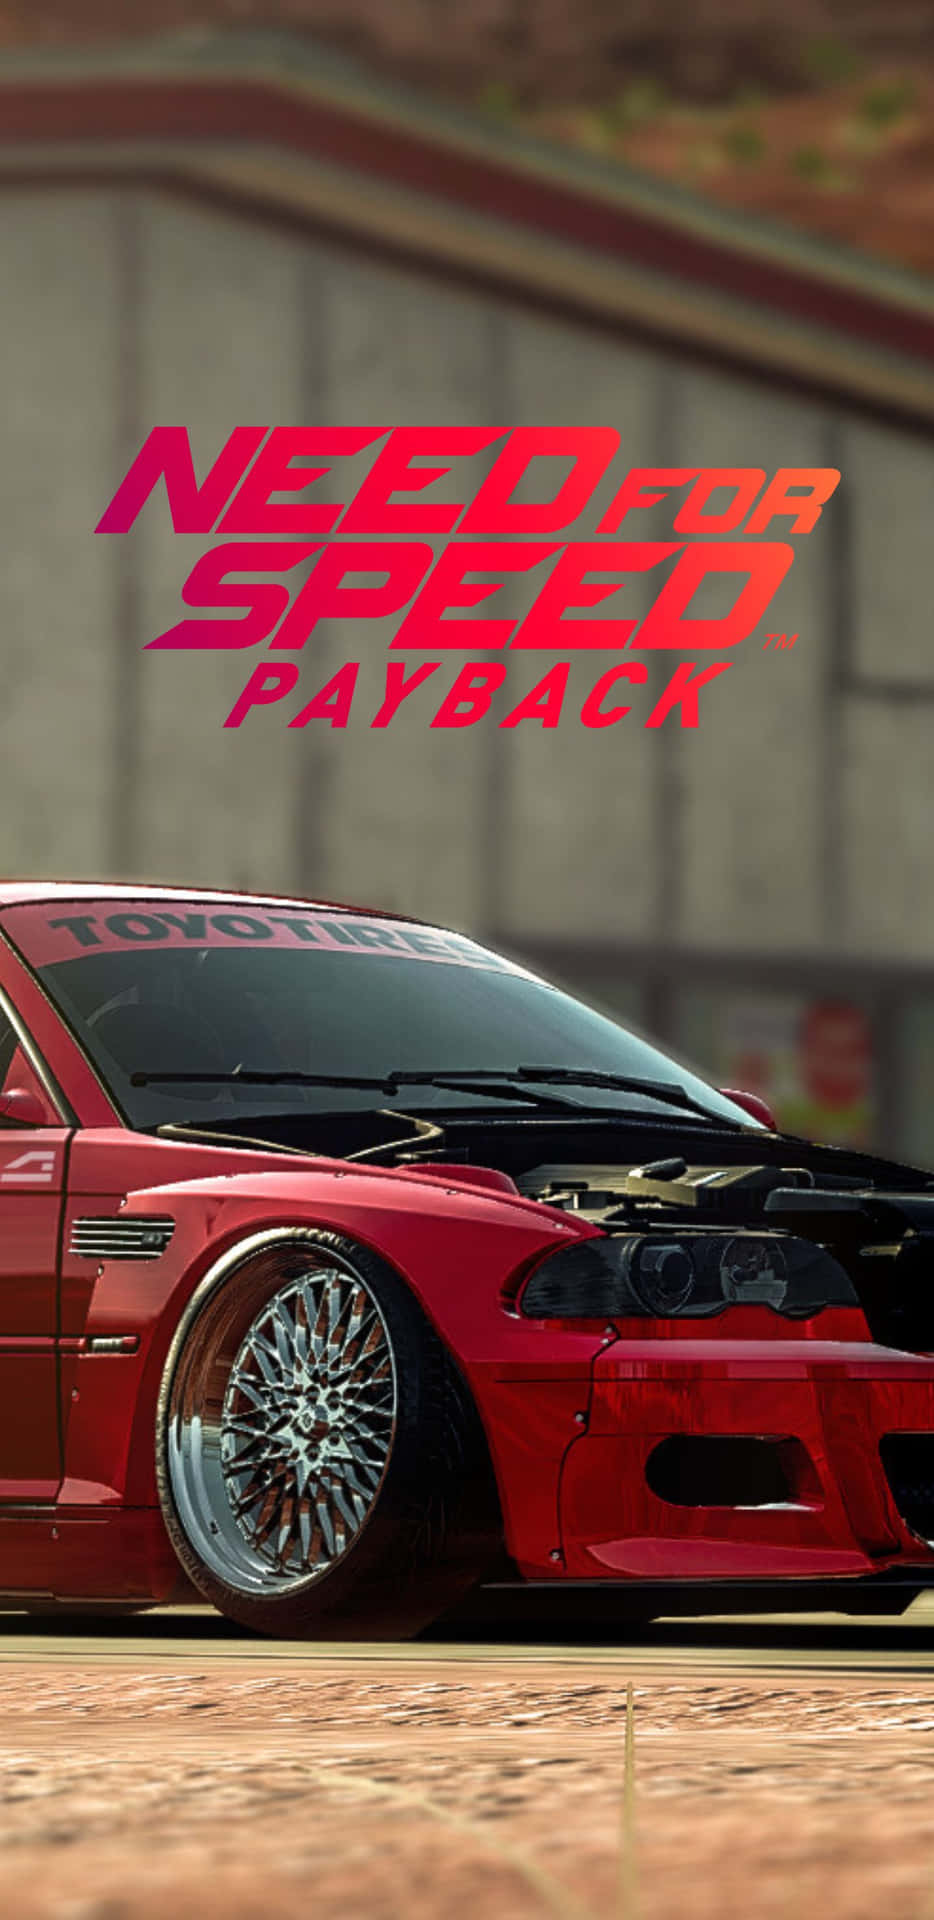 Blaze a trail in Need for Speed Payback on your Pixel 3XL